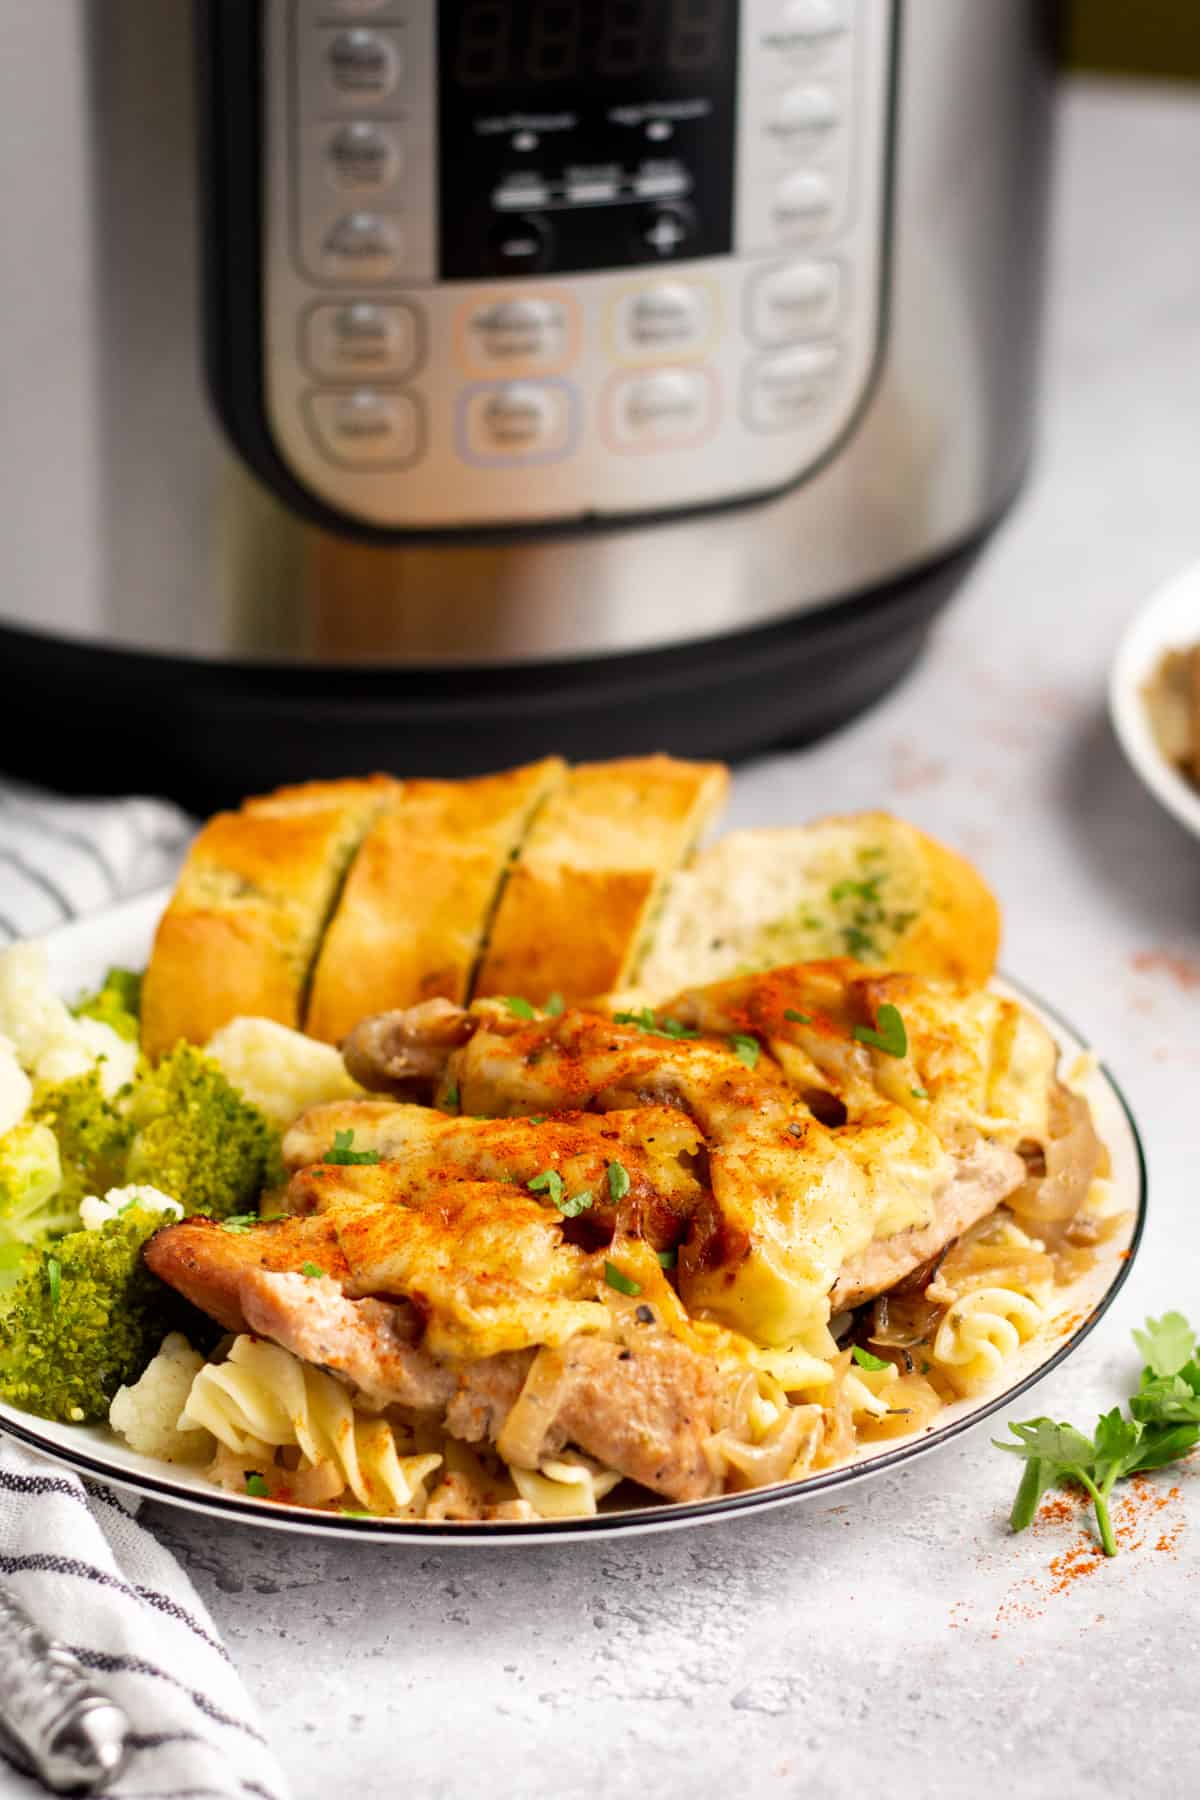 instant pot french onion chicken on a plate with vegetables and bread